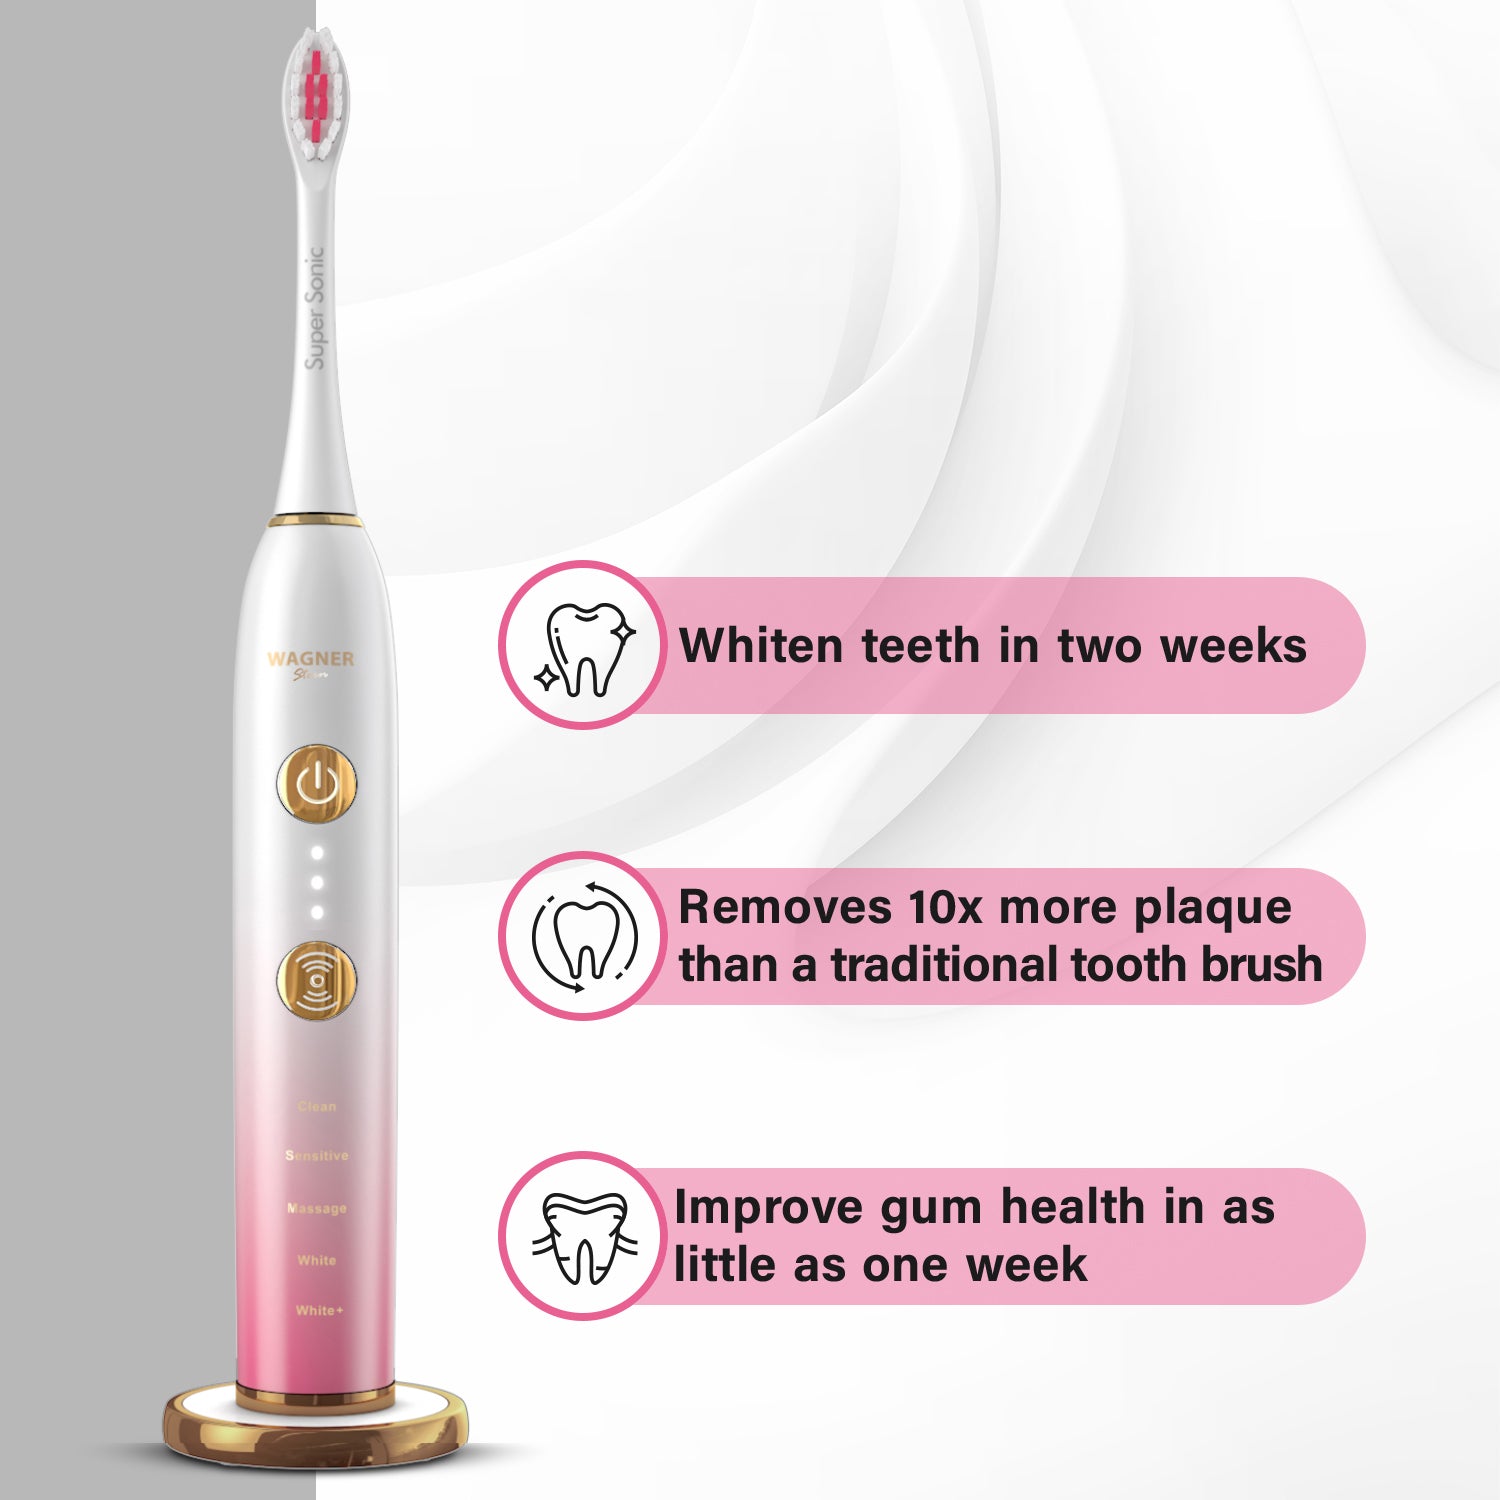 Wagner & Stern WHITEN+ Edition. Smart Electric Toothbrush with Pressure Sensor. 5 Brushing Modes and 3 Intensity Levels, 8 Dupont Bristles, Premium Travel Case.